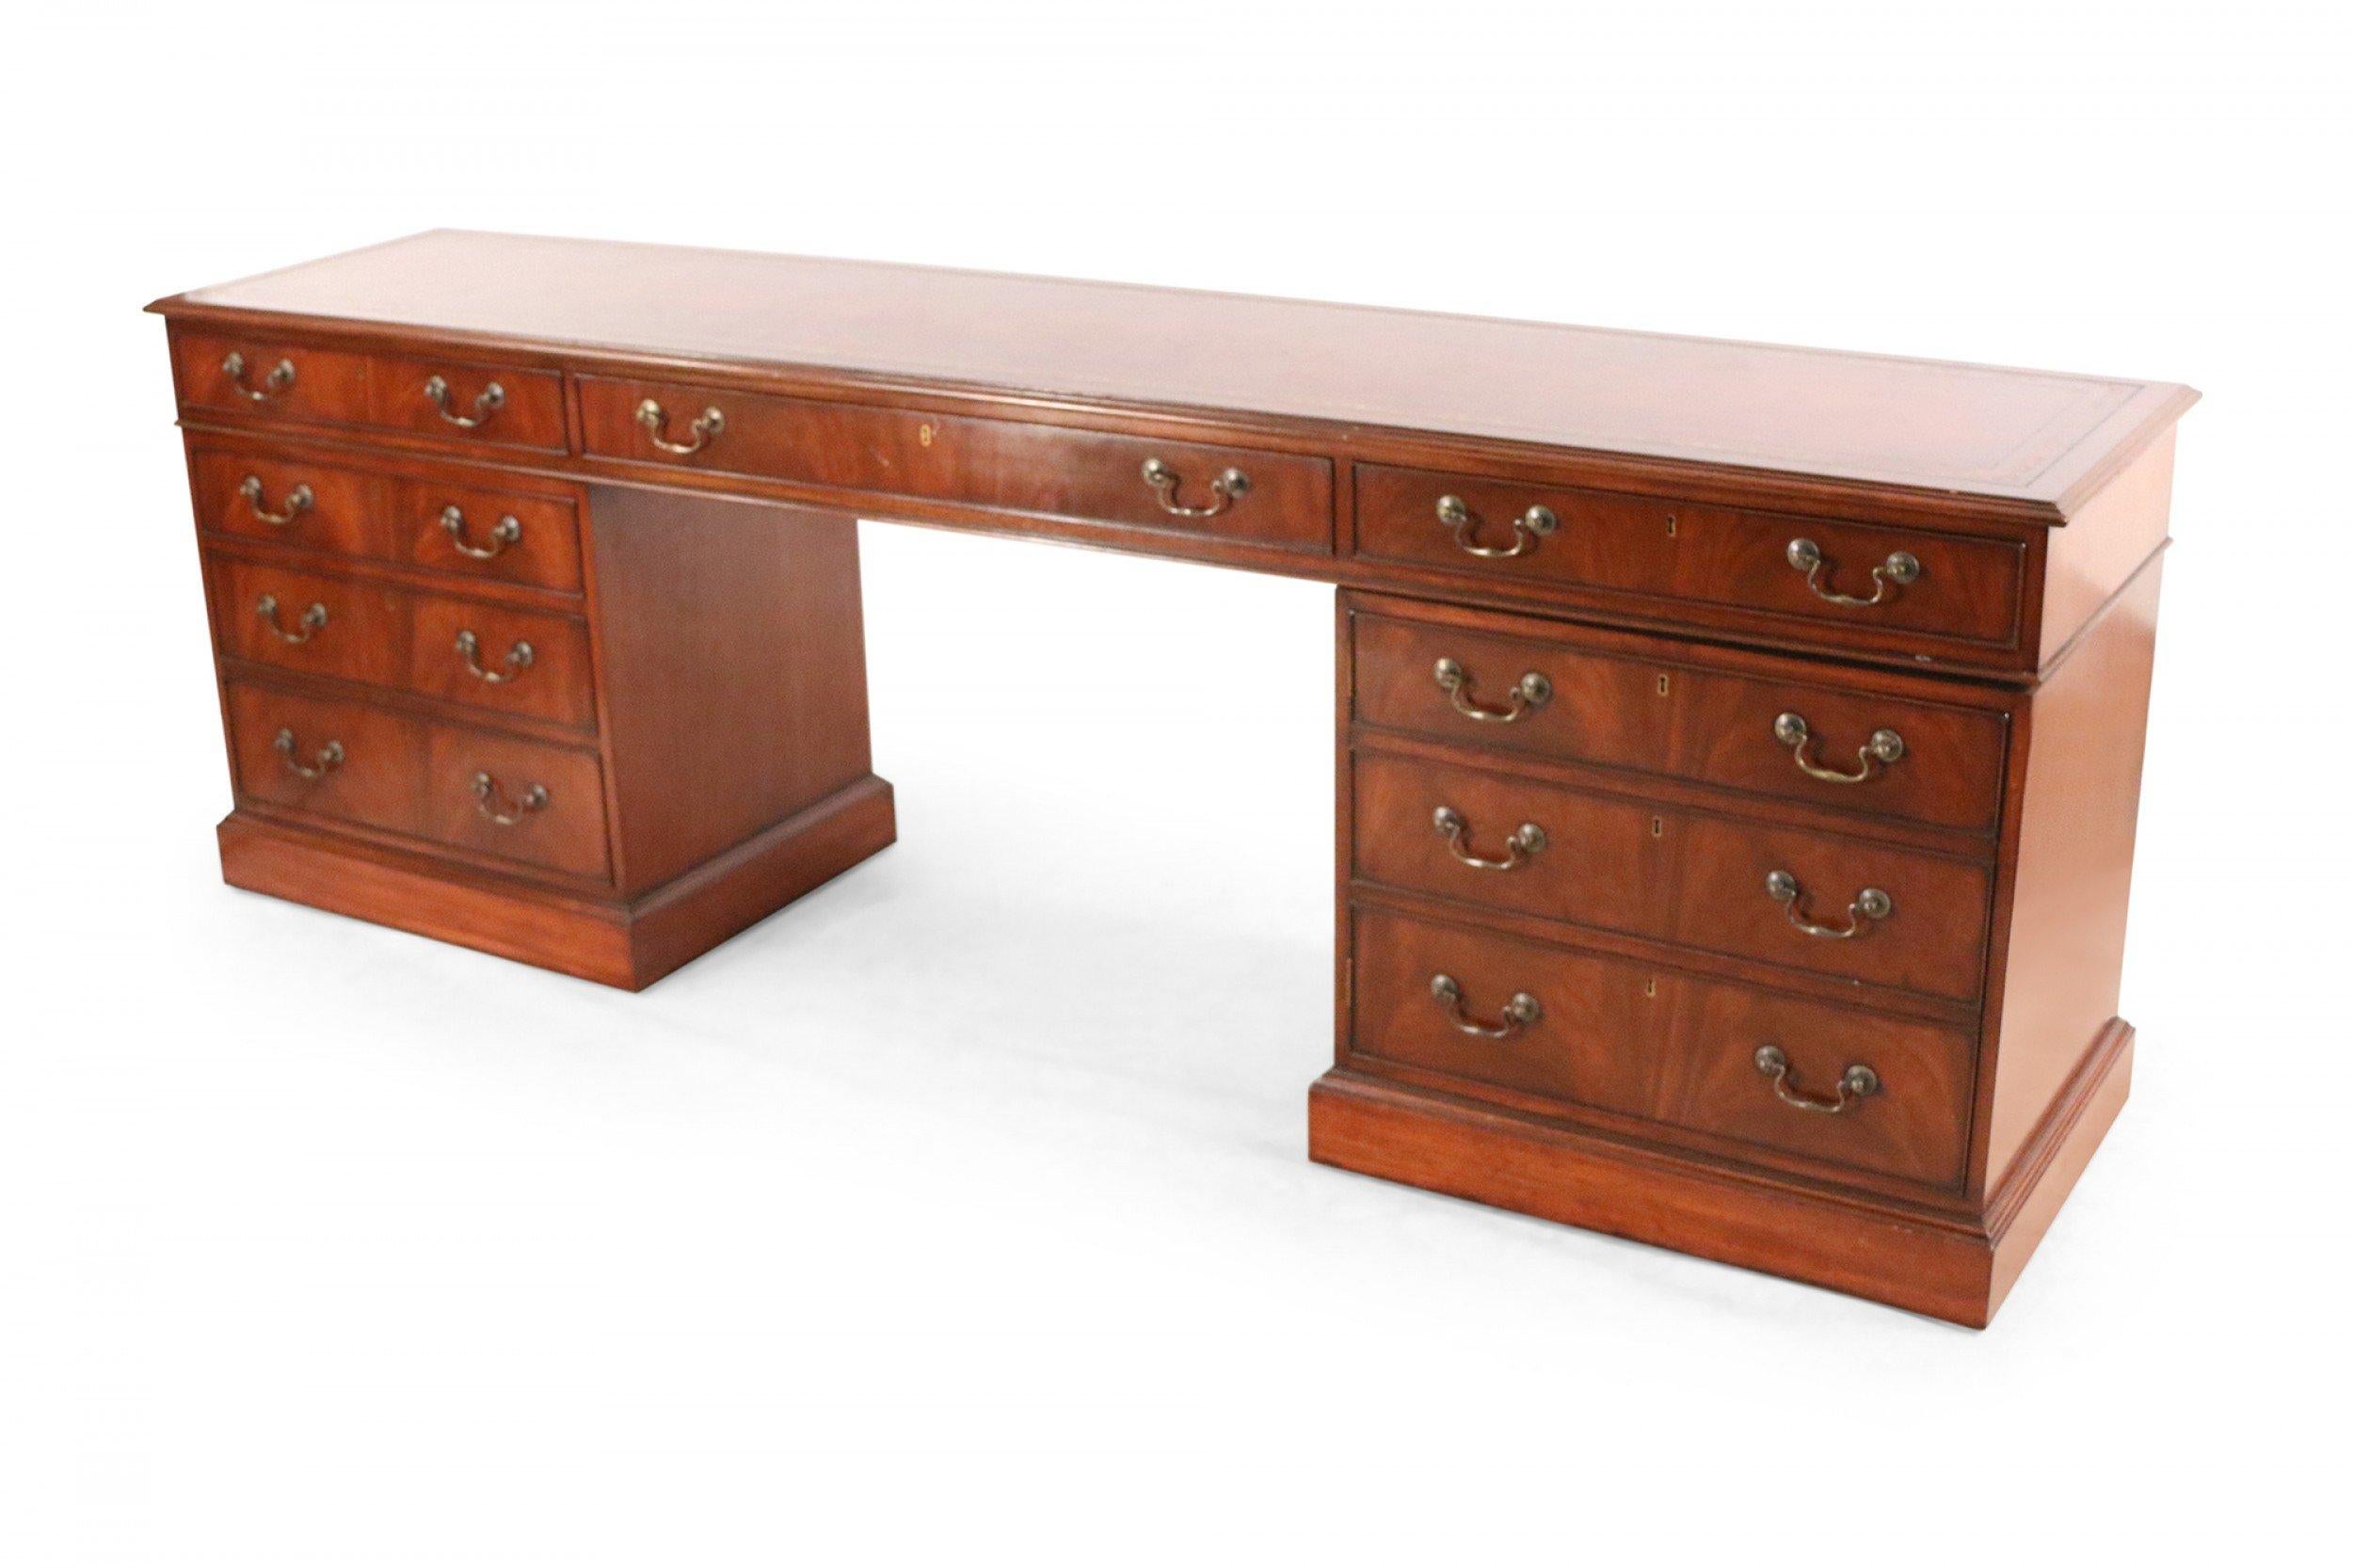 English Georgian-style (19th century) mahogany desk with a long, slim profile with six drawers and brass drawer pulls.